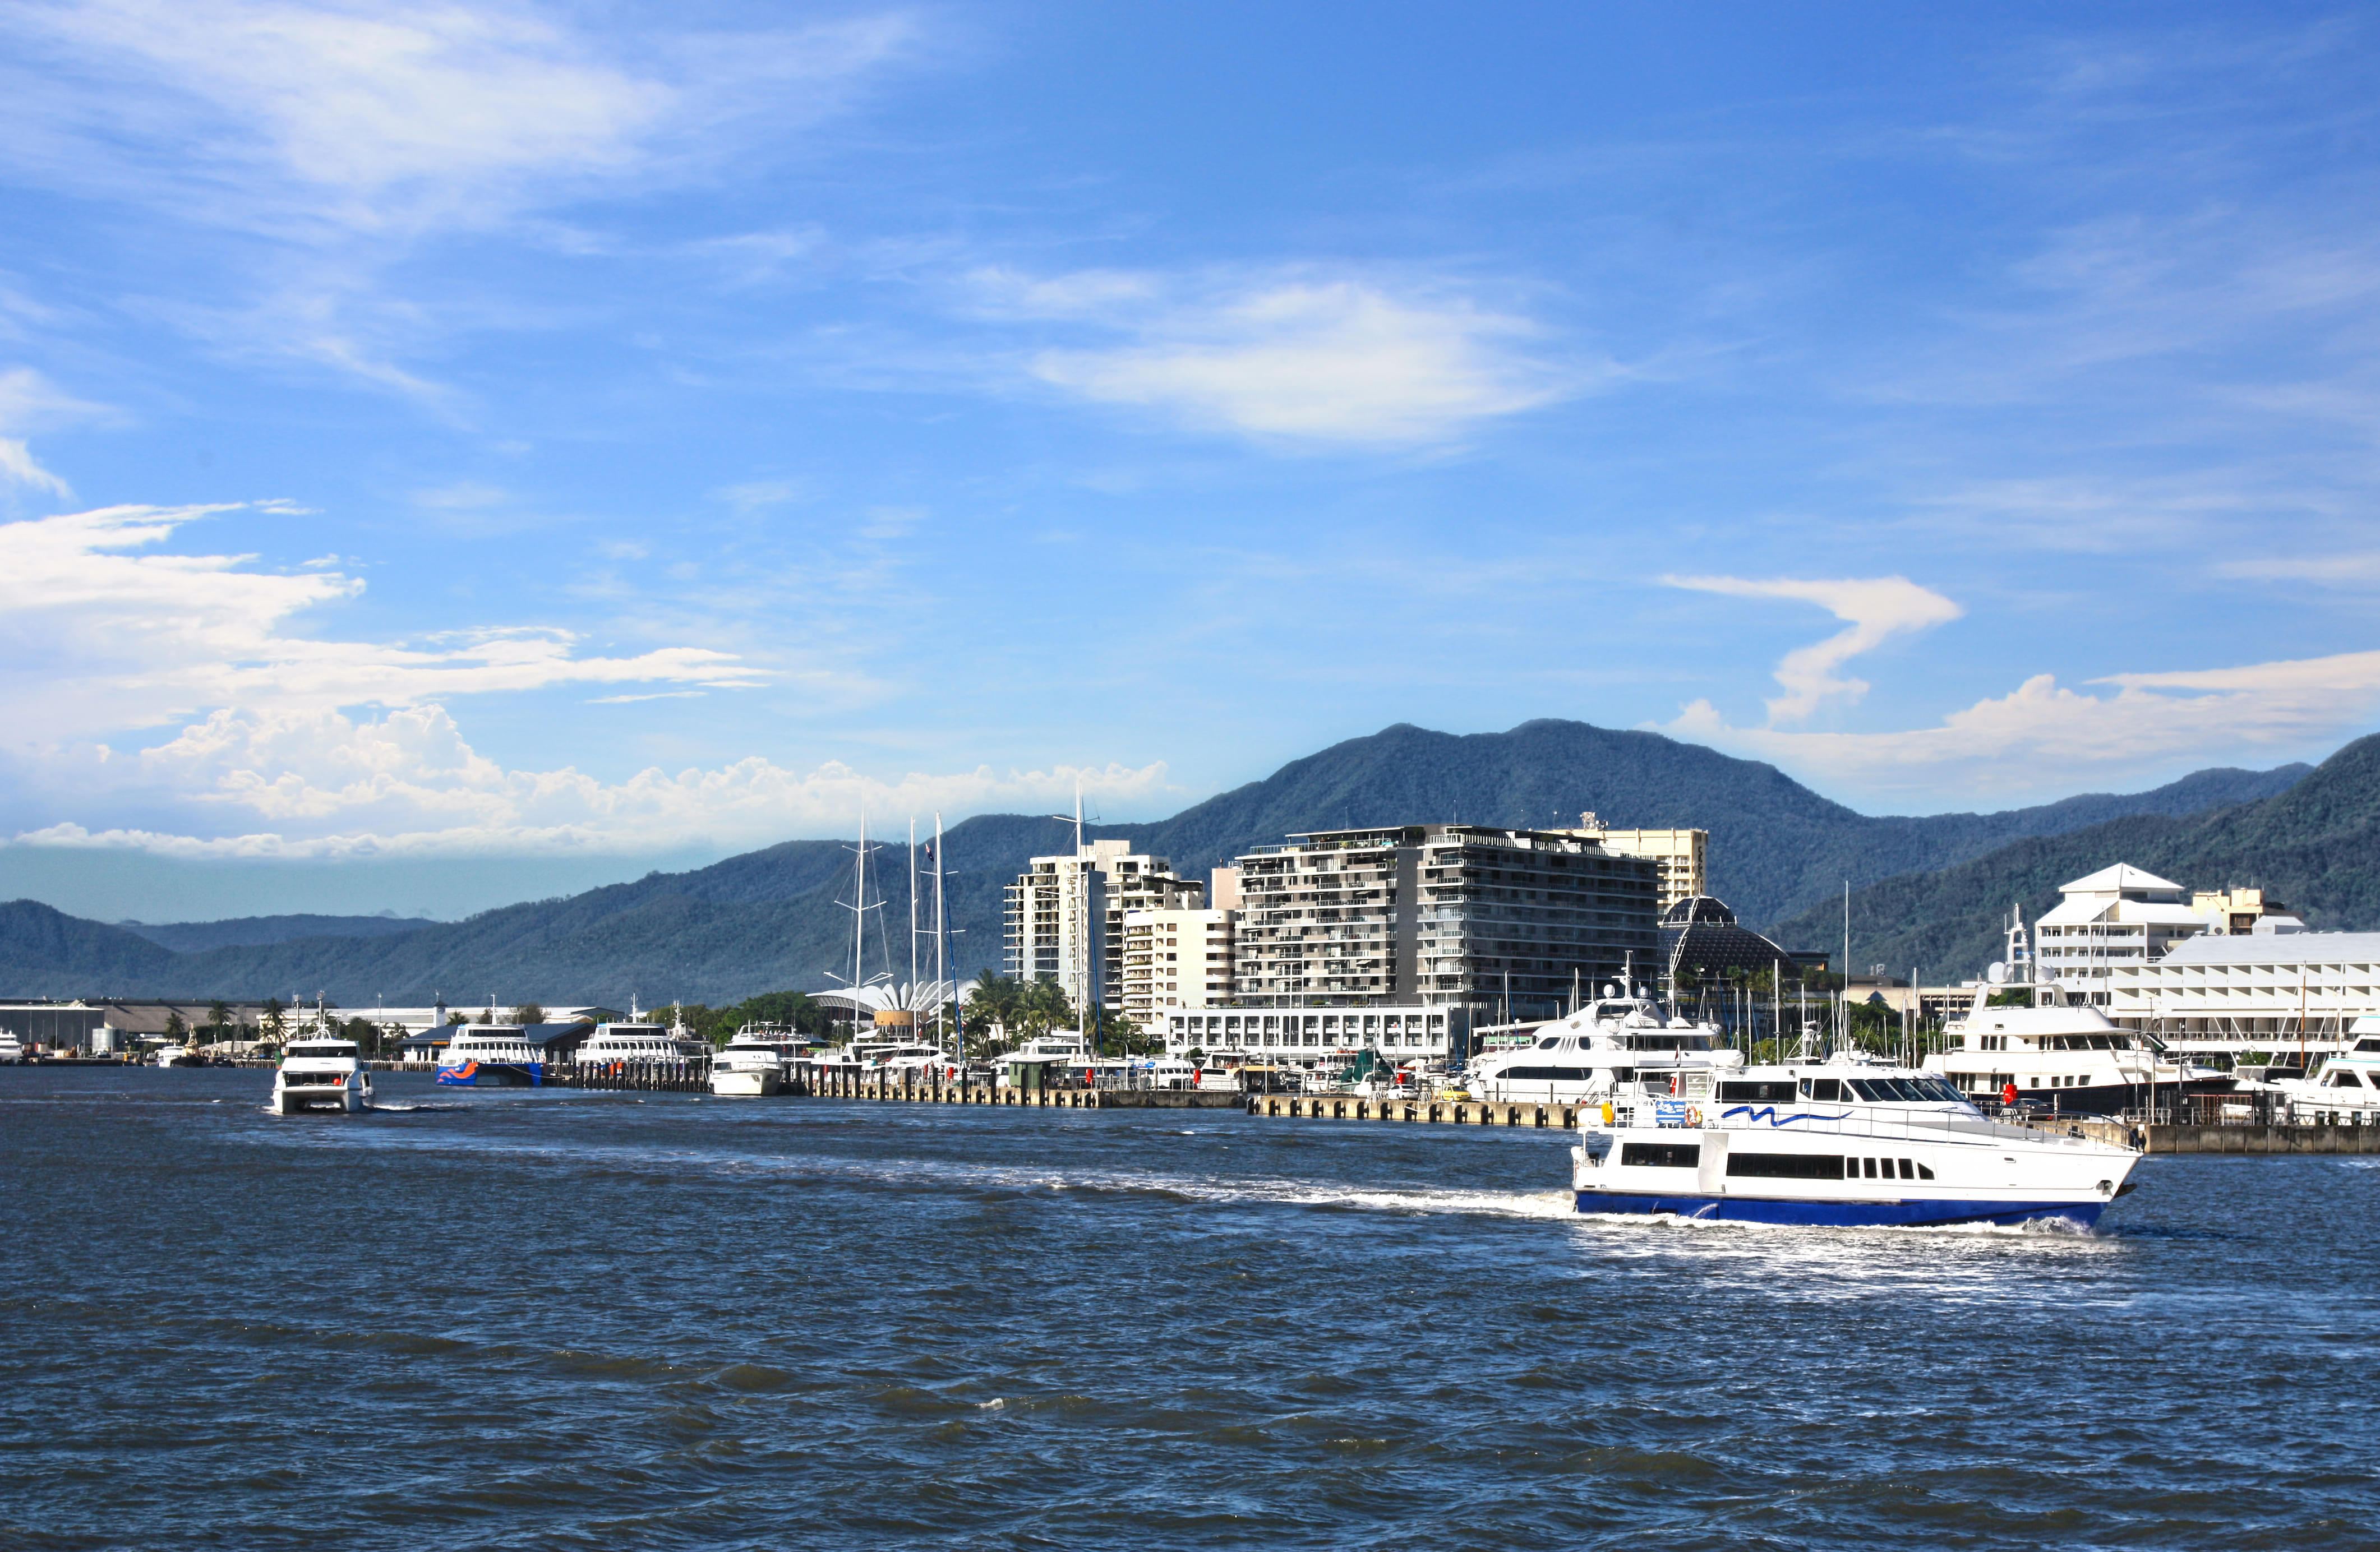 Things to Do in Cairns